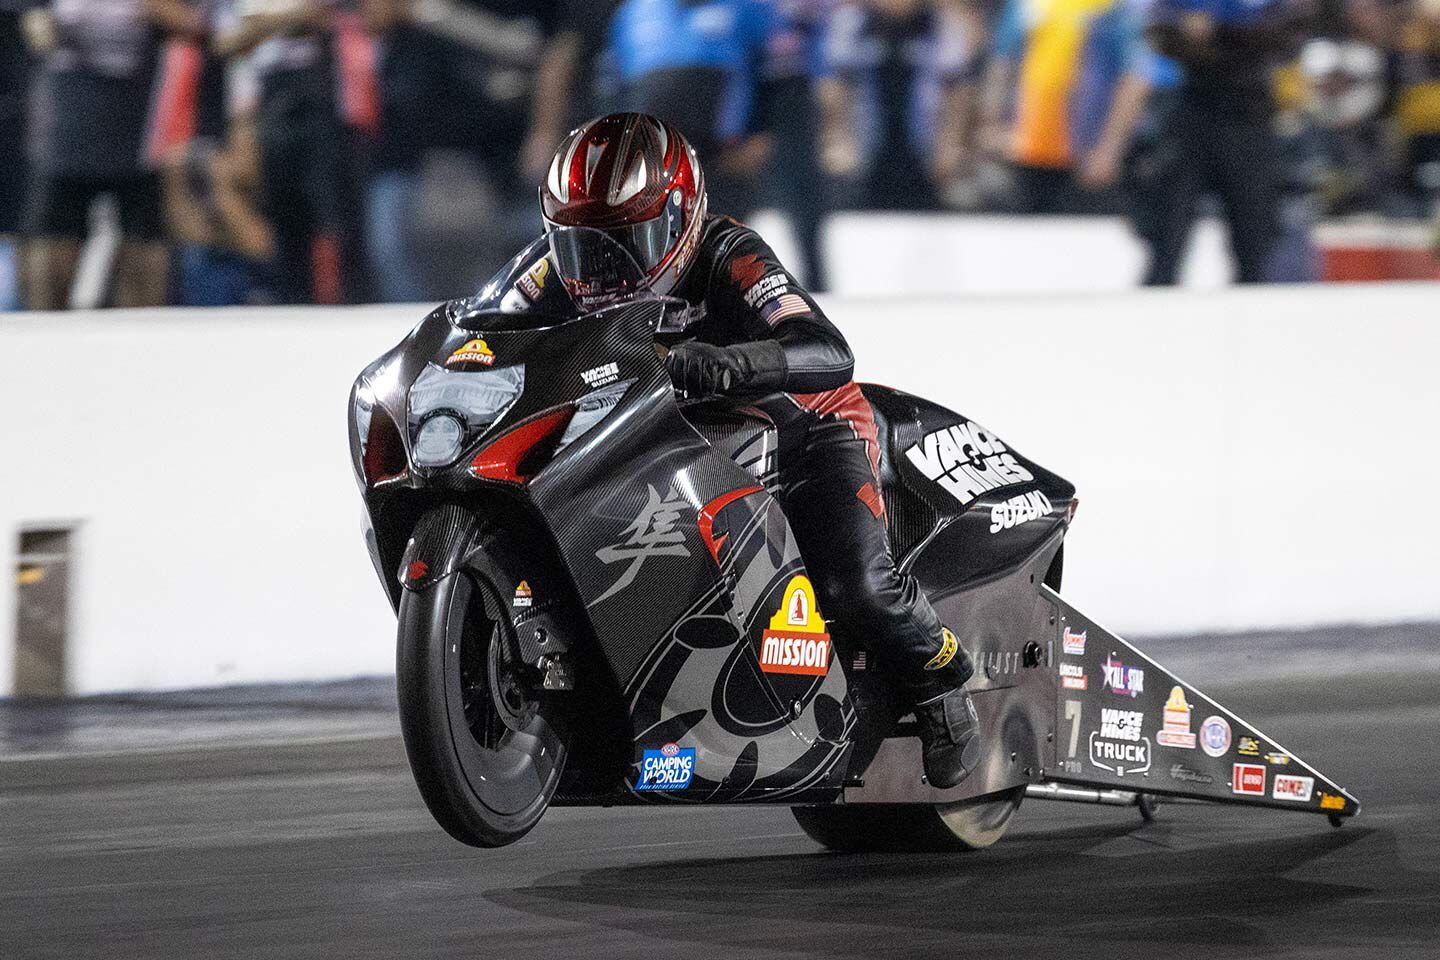 Vance & Hines’ Pro Stock racer maintains a visual connection to the latest Suzuki Hayabusa.